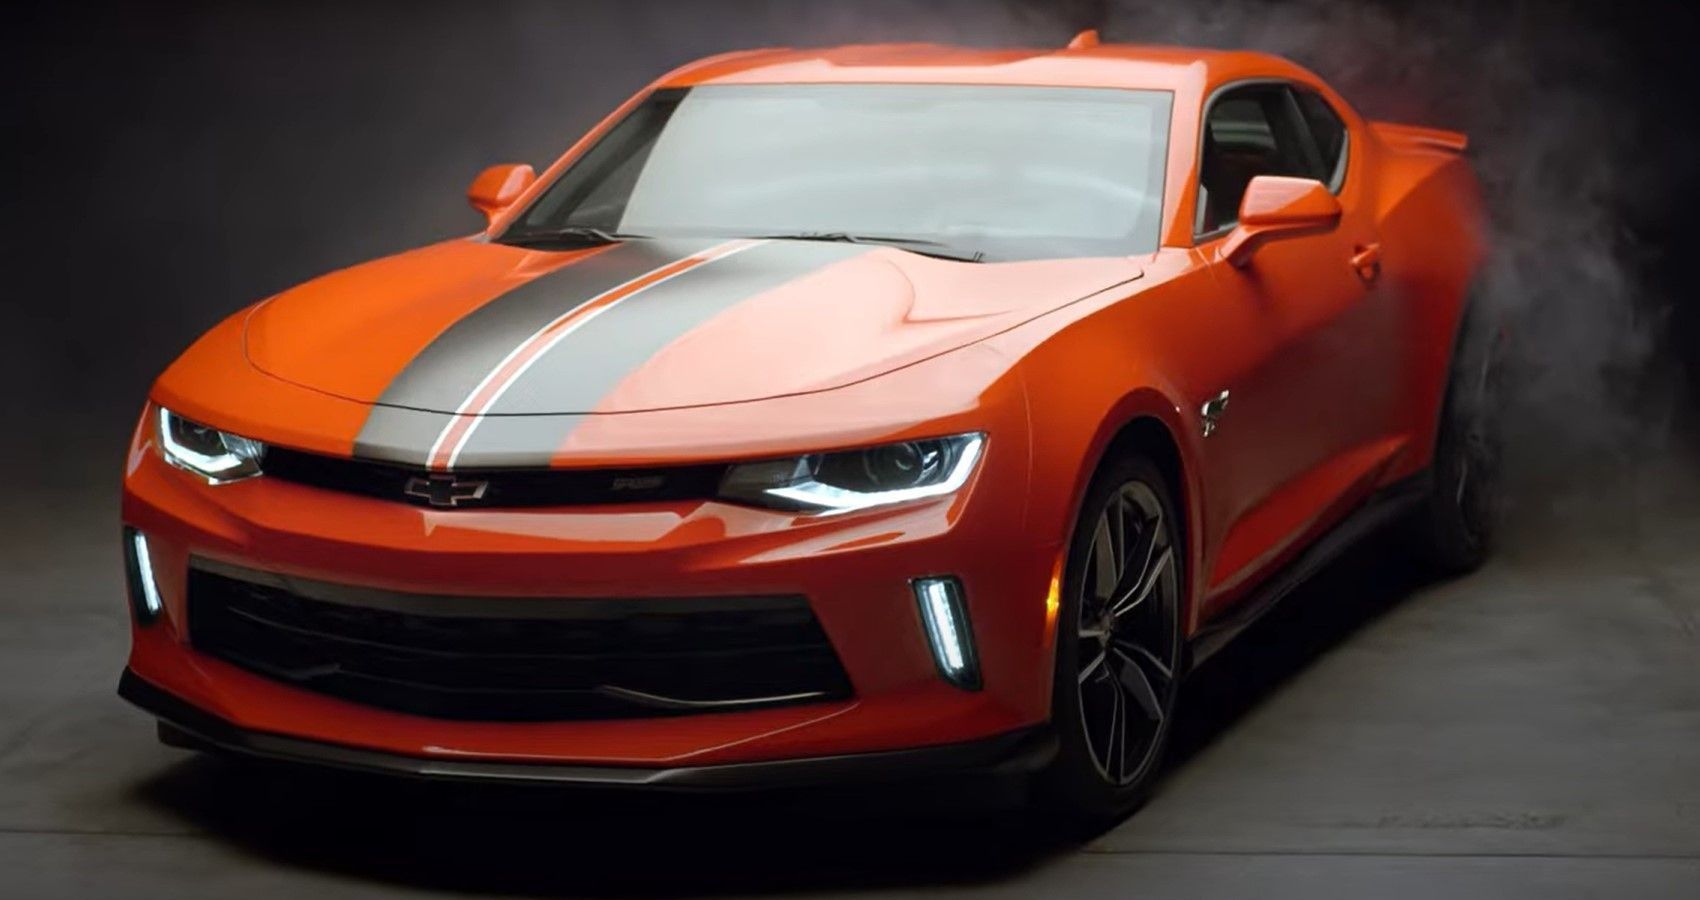 Sixth Generation Camaro Bows Out, Chevrolet Announces Final